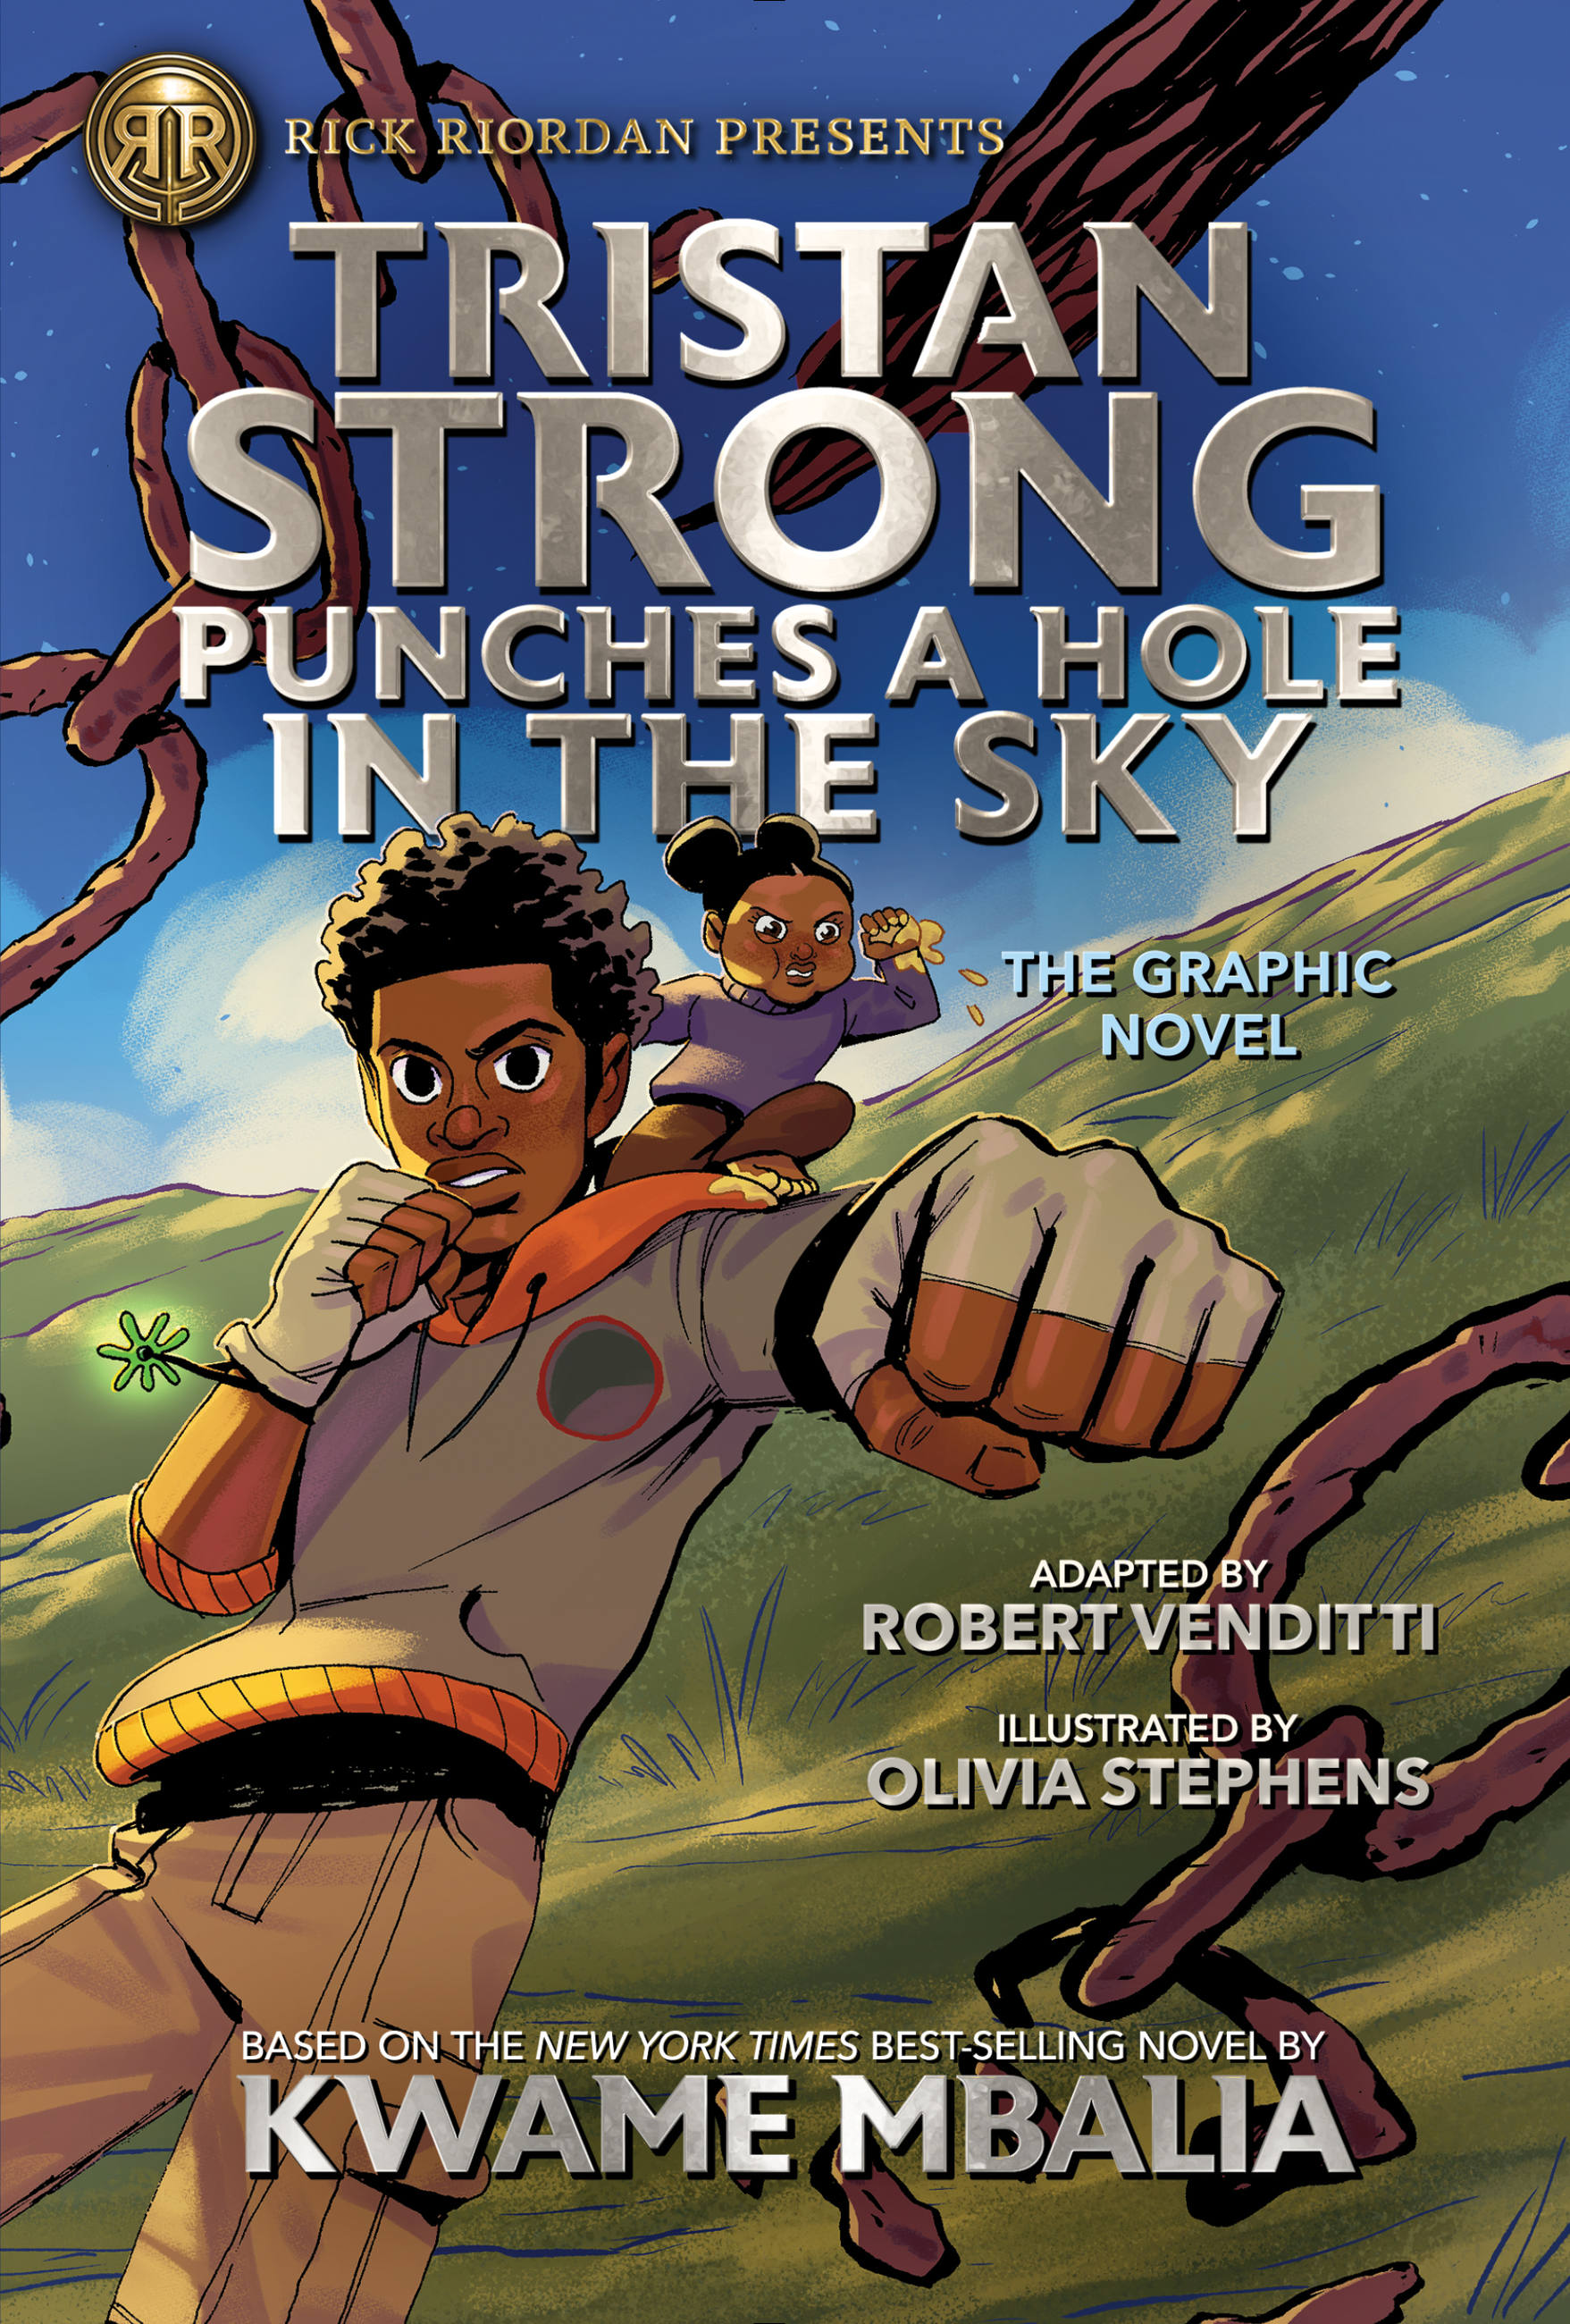 Tristan Strong Punches a Hole in the Sky, The Graphic Novel by Kwame